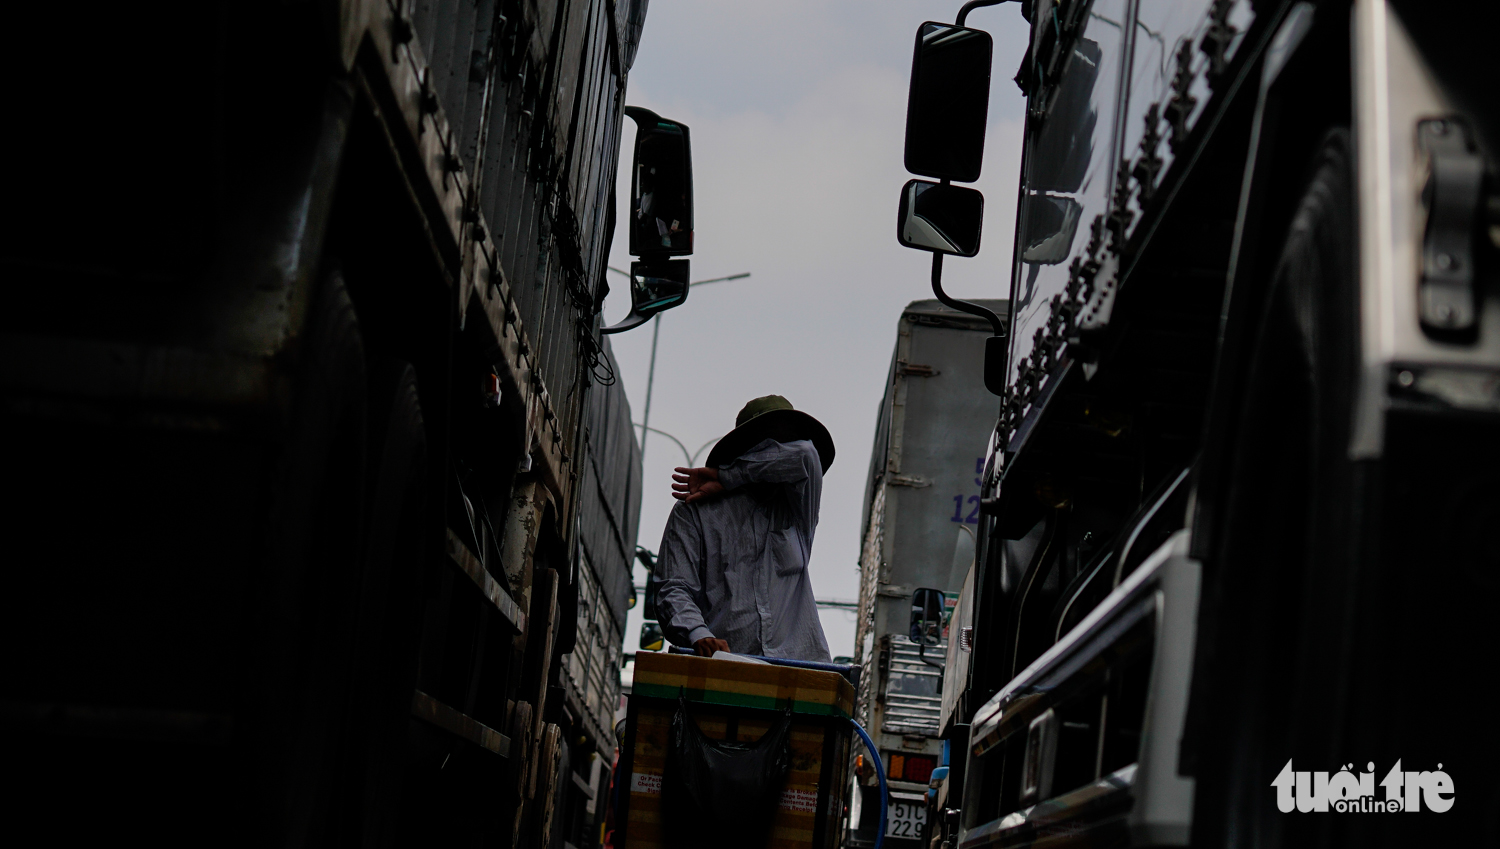 A drink vendor pushes in the middle of the roadway. Photo: Tuoi Tre